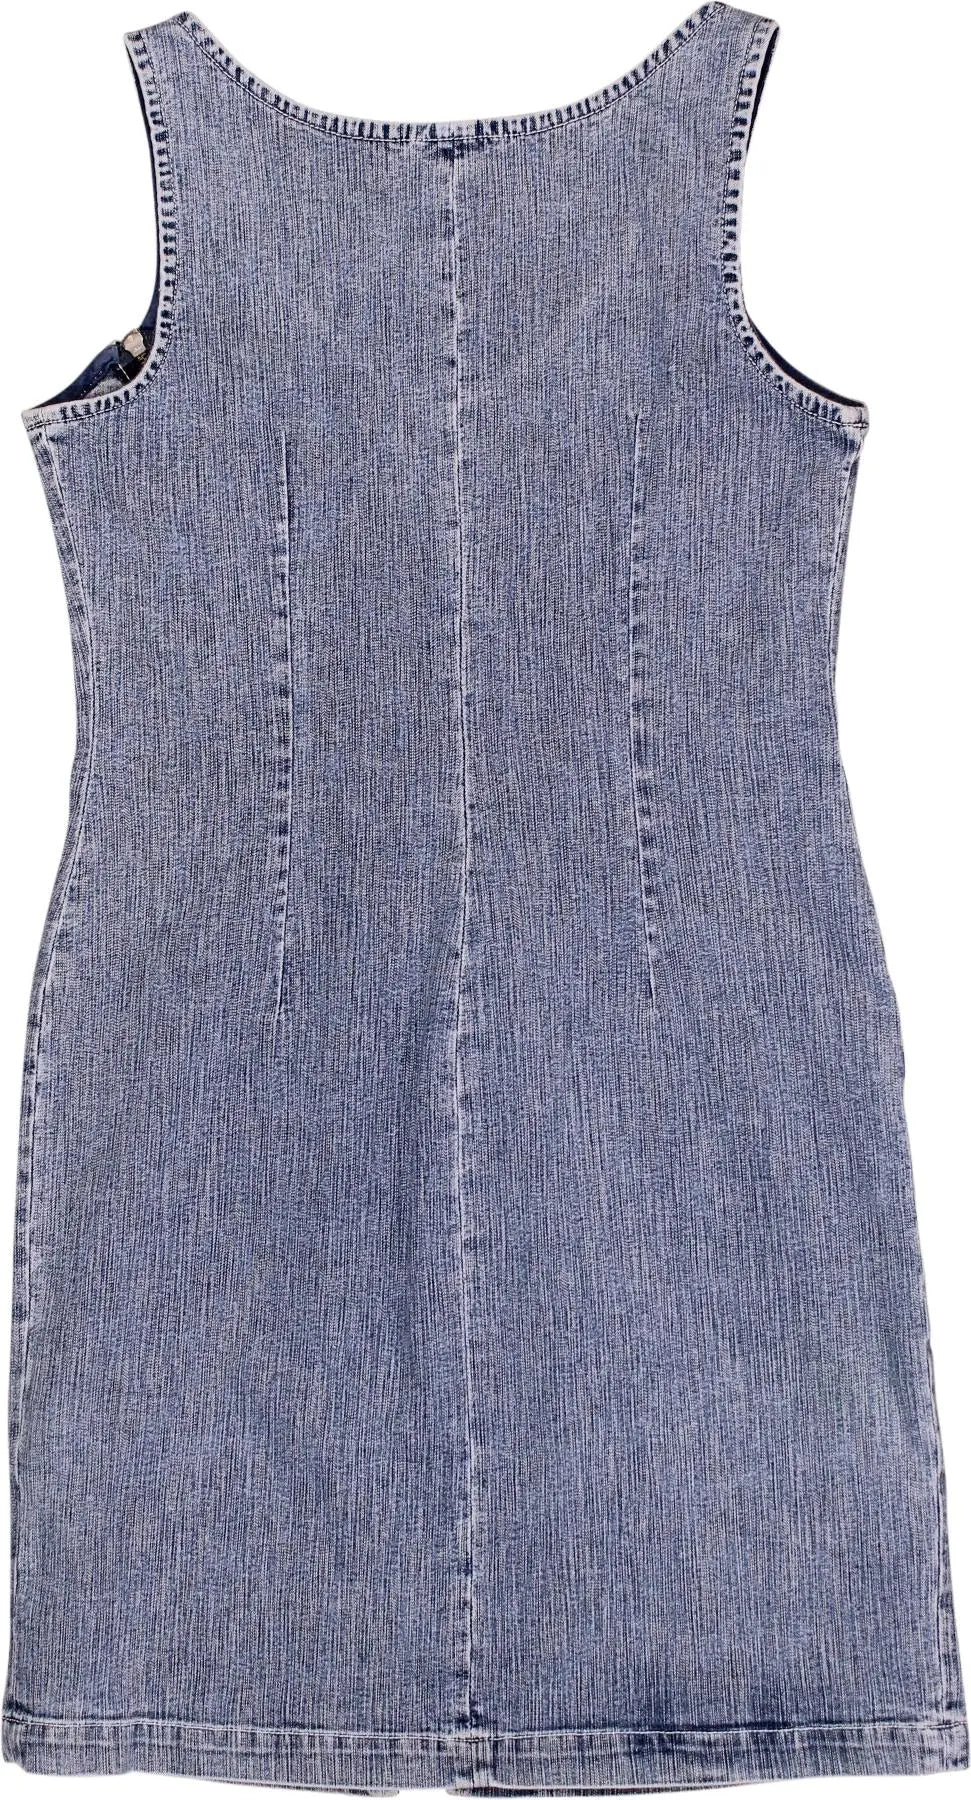 Unknown - Zip-up Denim Dress- ThriftTale.com - Vintage and second handclothing